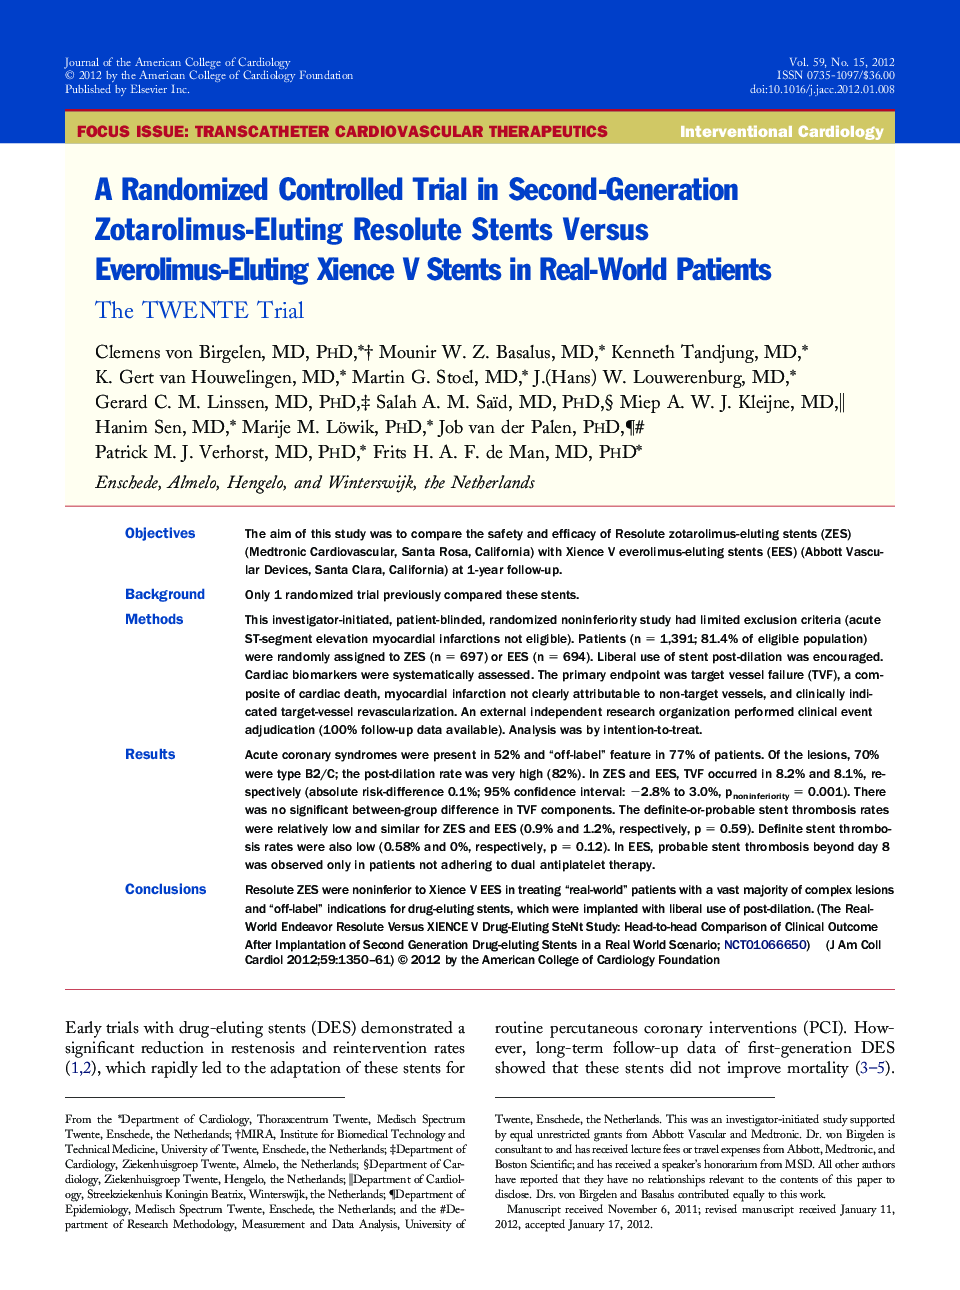 A Randomized Controlled Trial in Second-Generation Zotarolimus-Eluting Resolute Stents Versus Everolimus-Eluting Xience V Stents in Real-World Patients: The TWENTE Trial